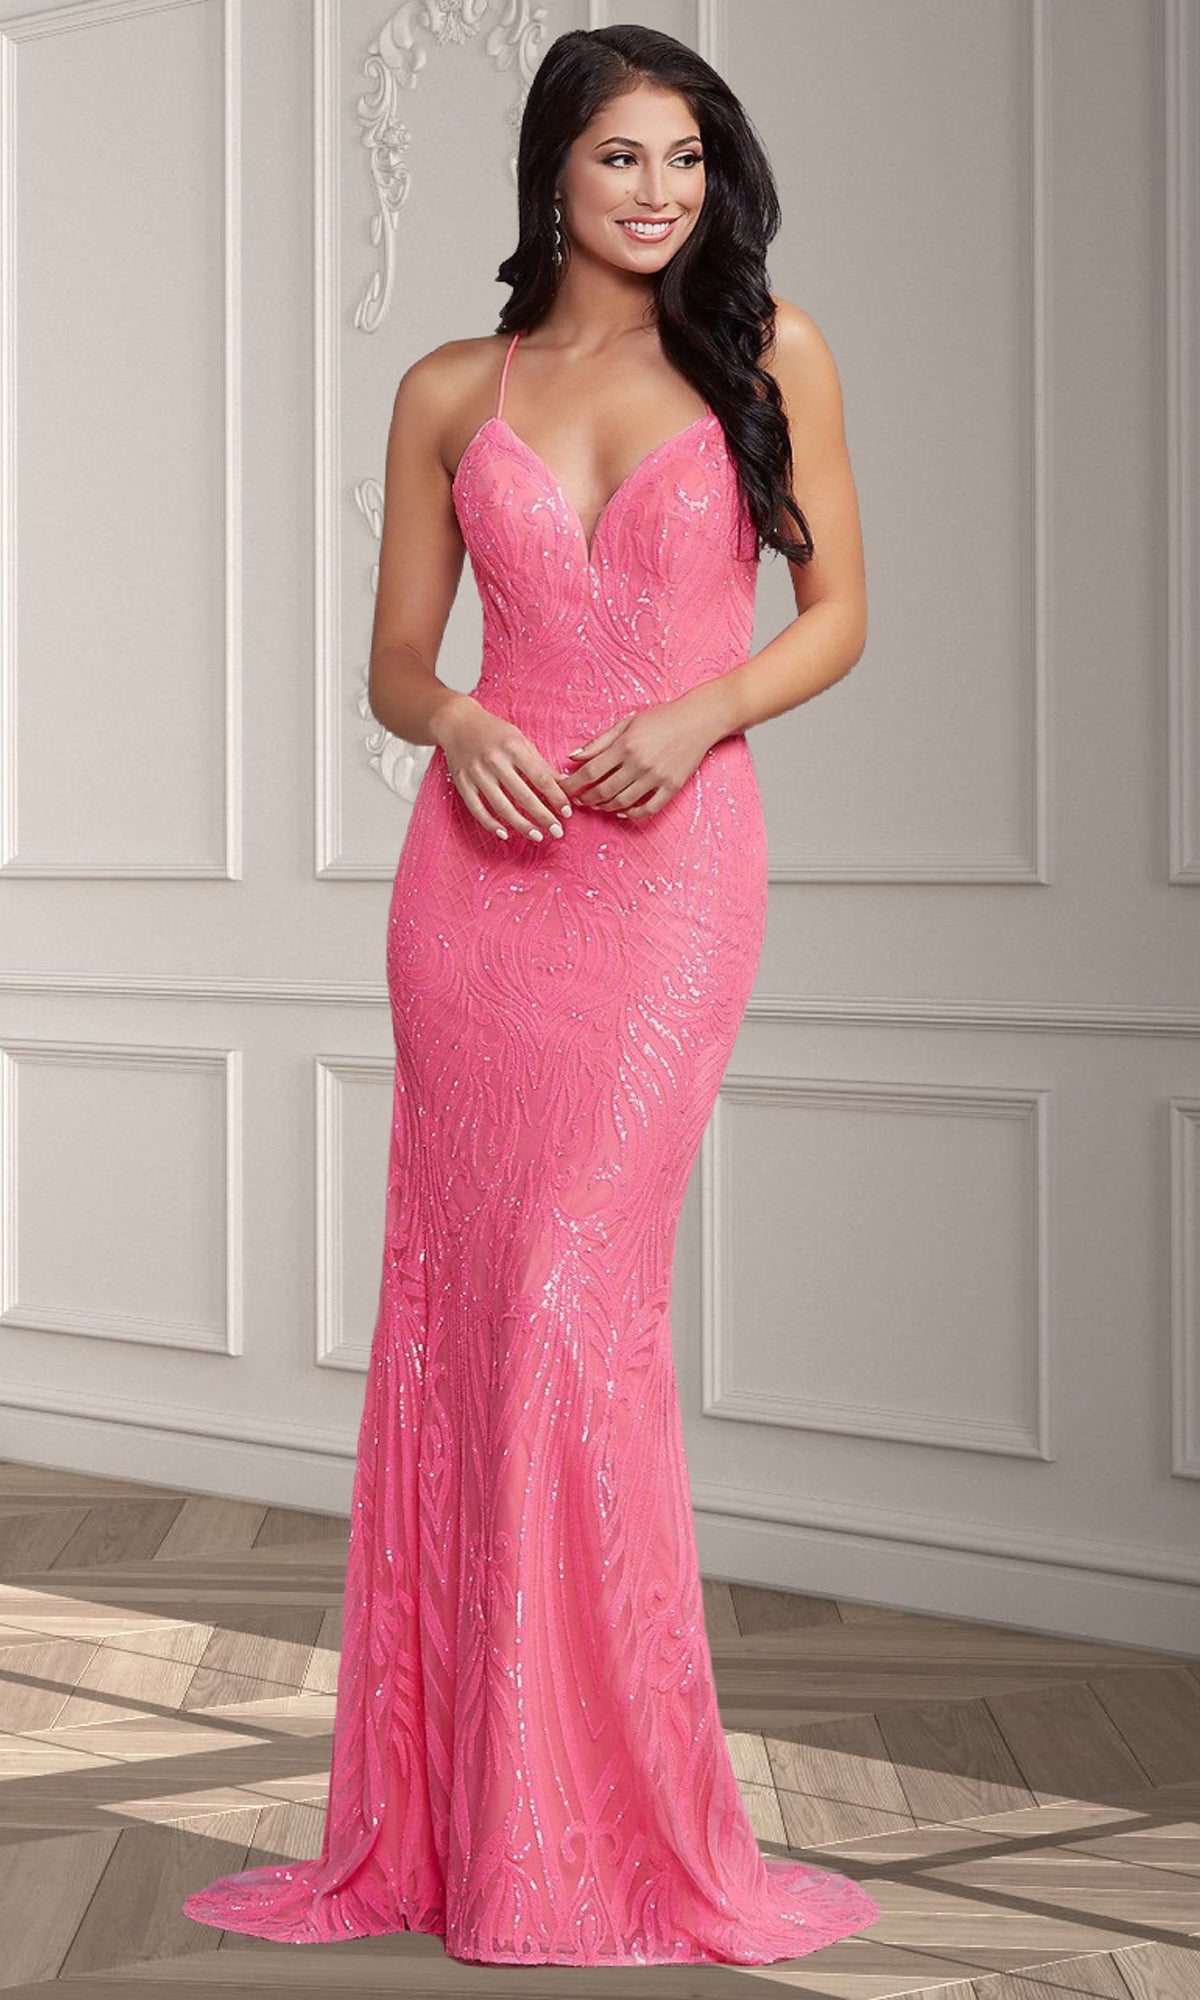 Strappy-Back Long Sexy Shimmer Formal Prom Dress